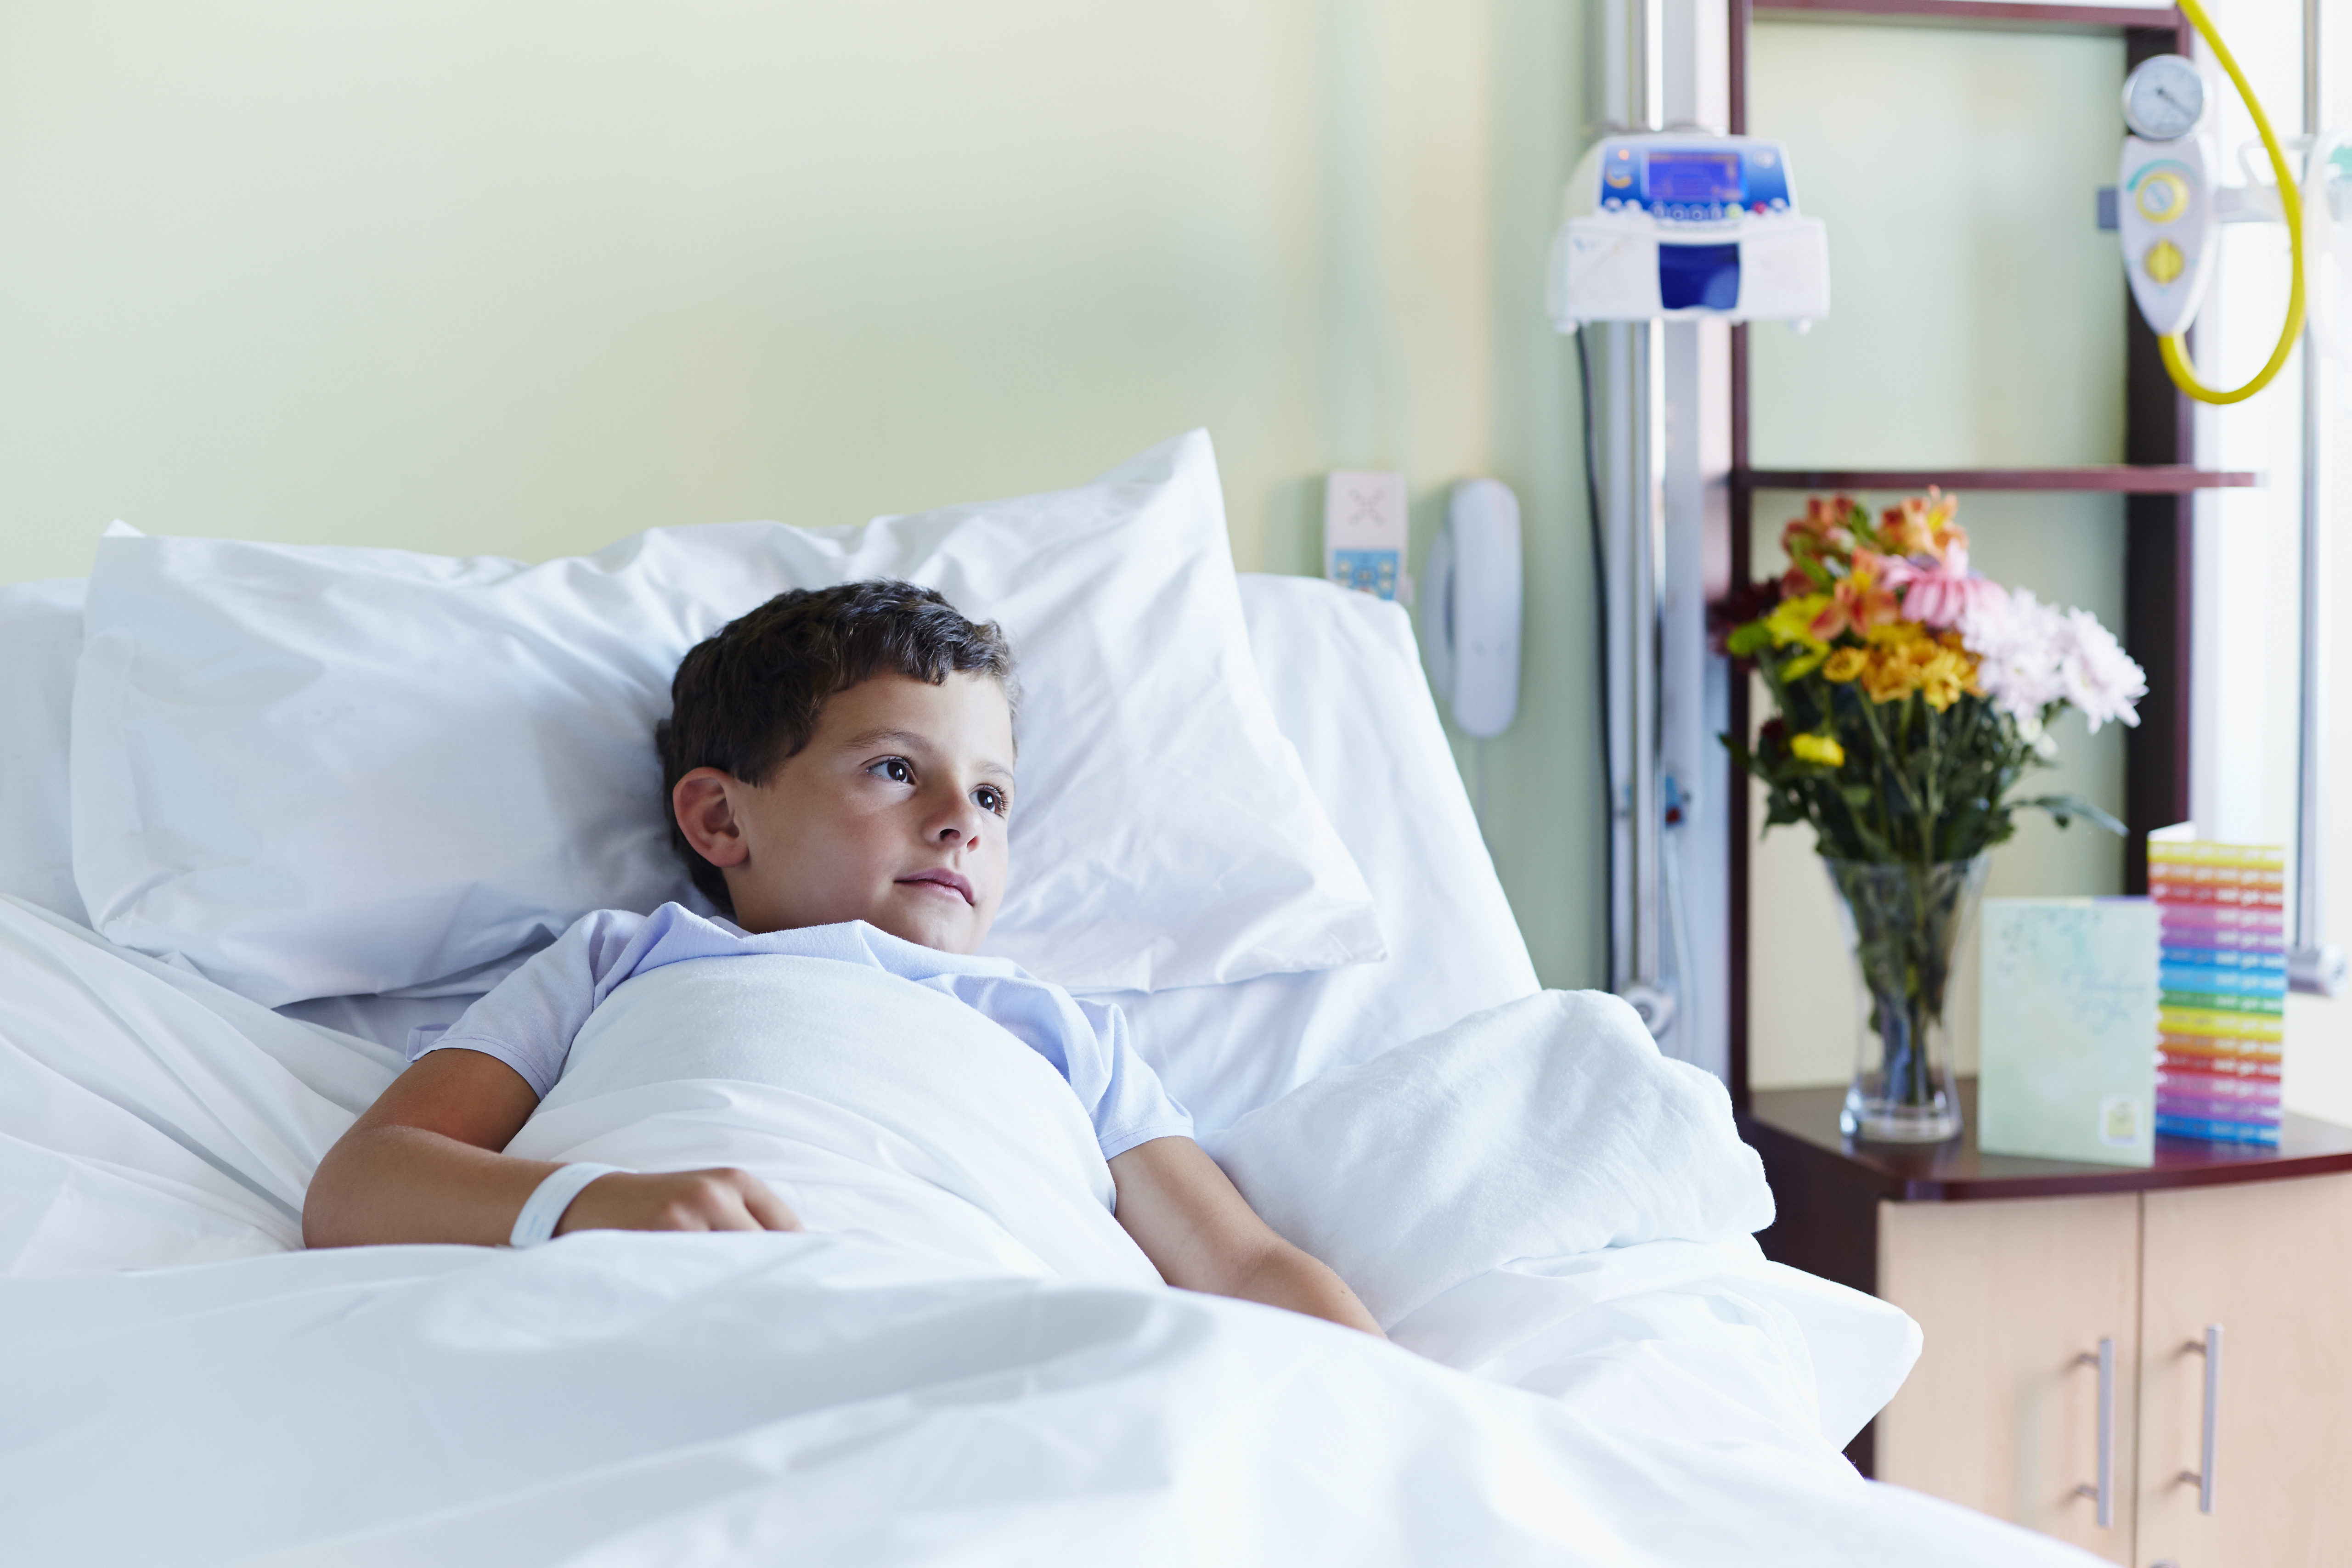 Child In Hospital Bed